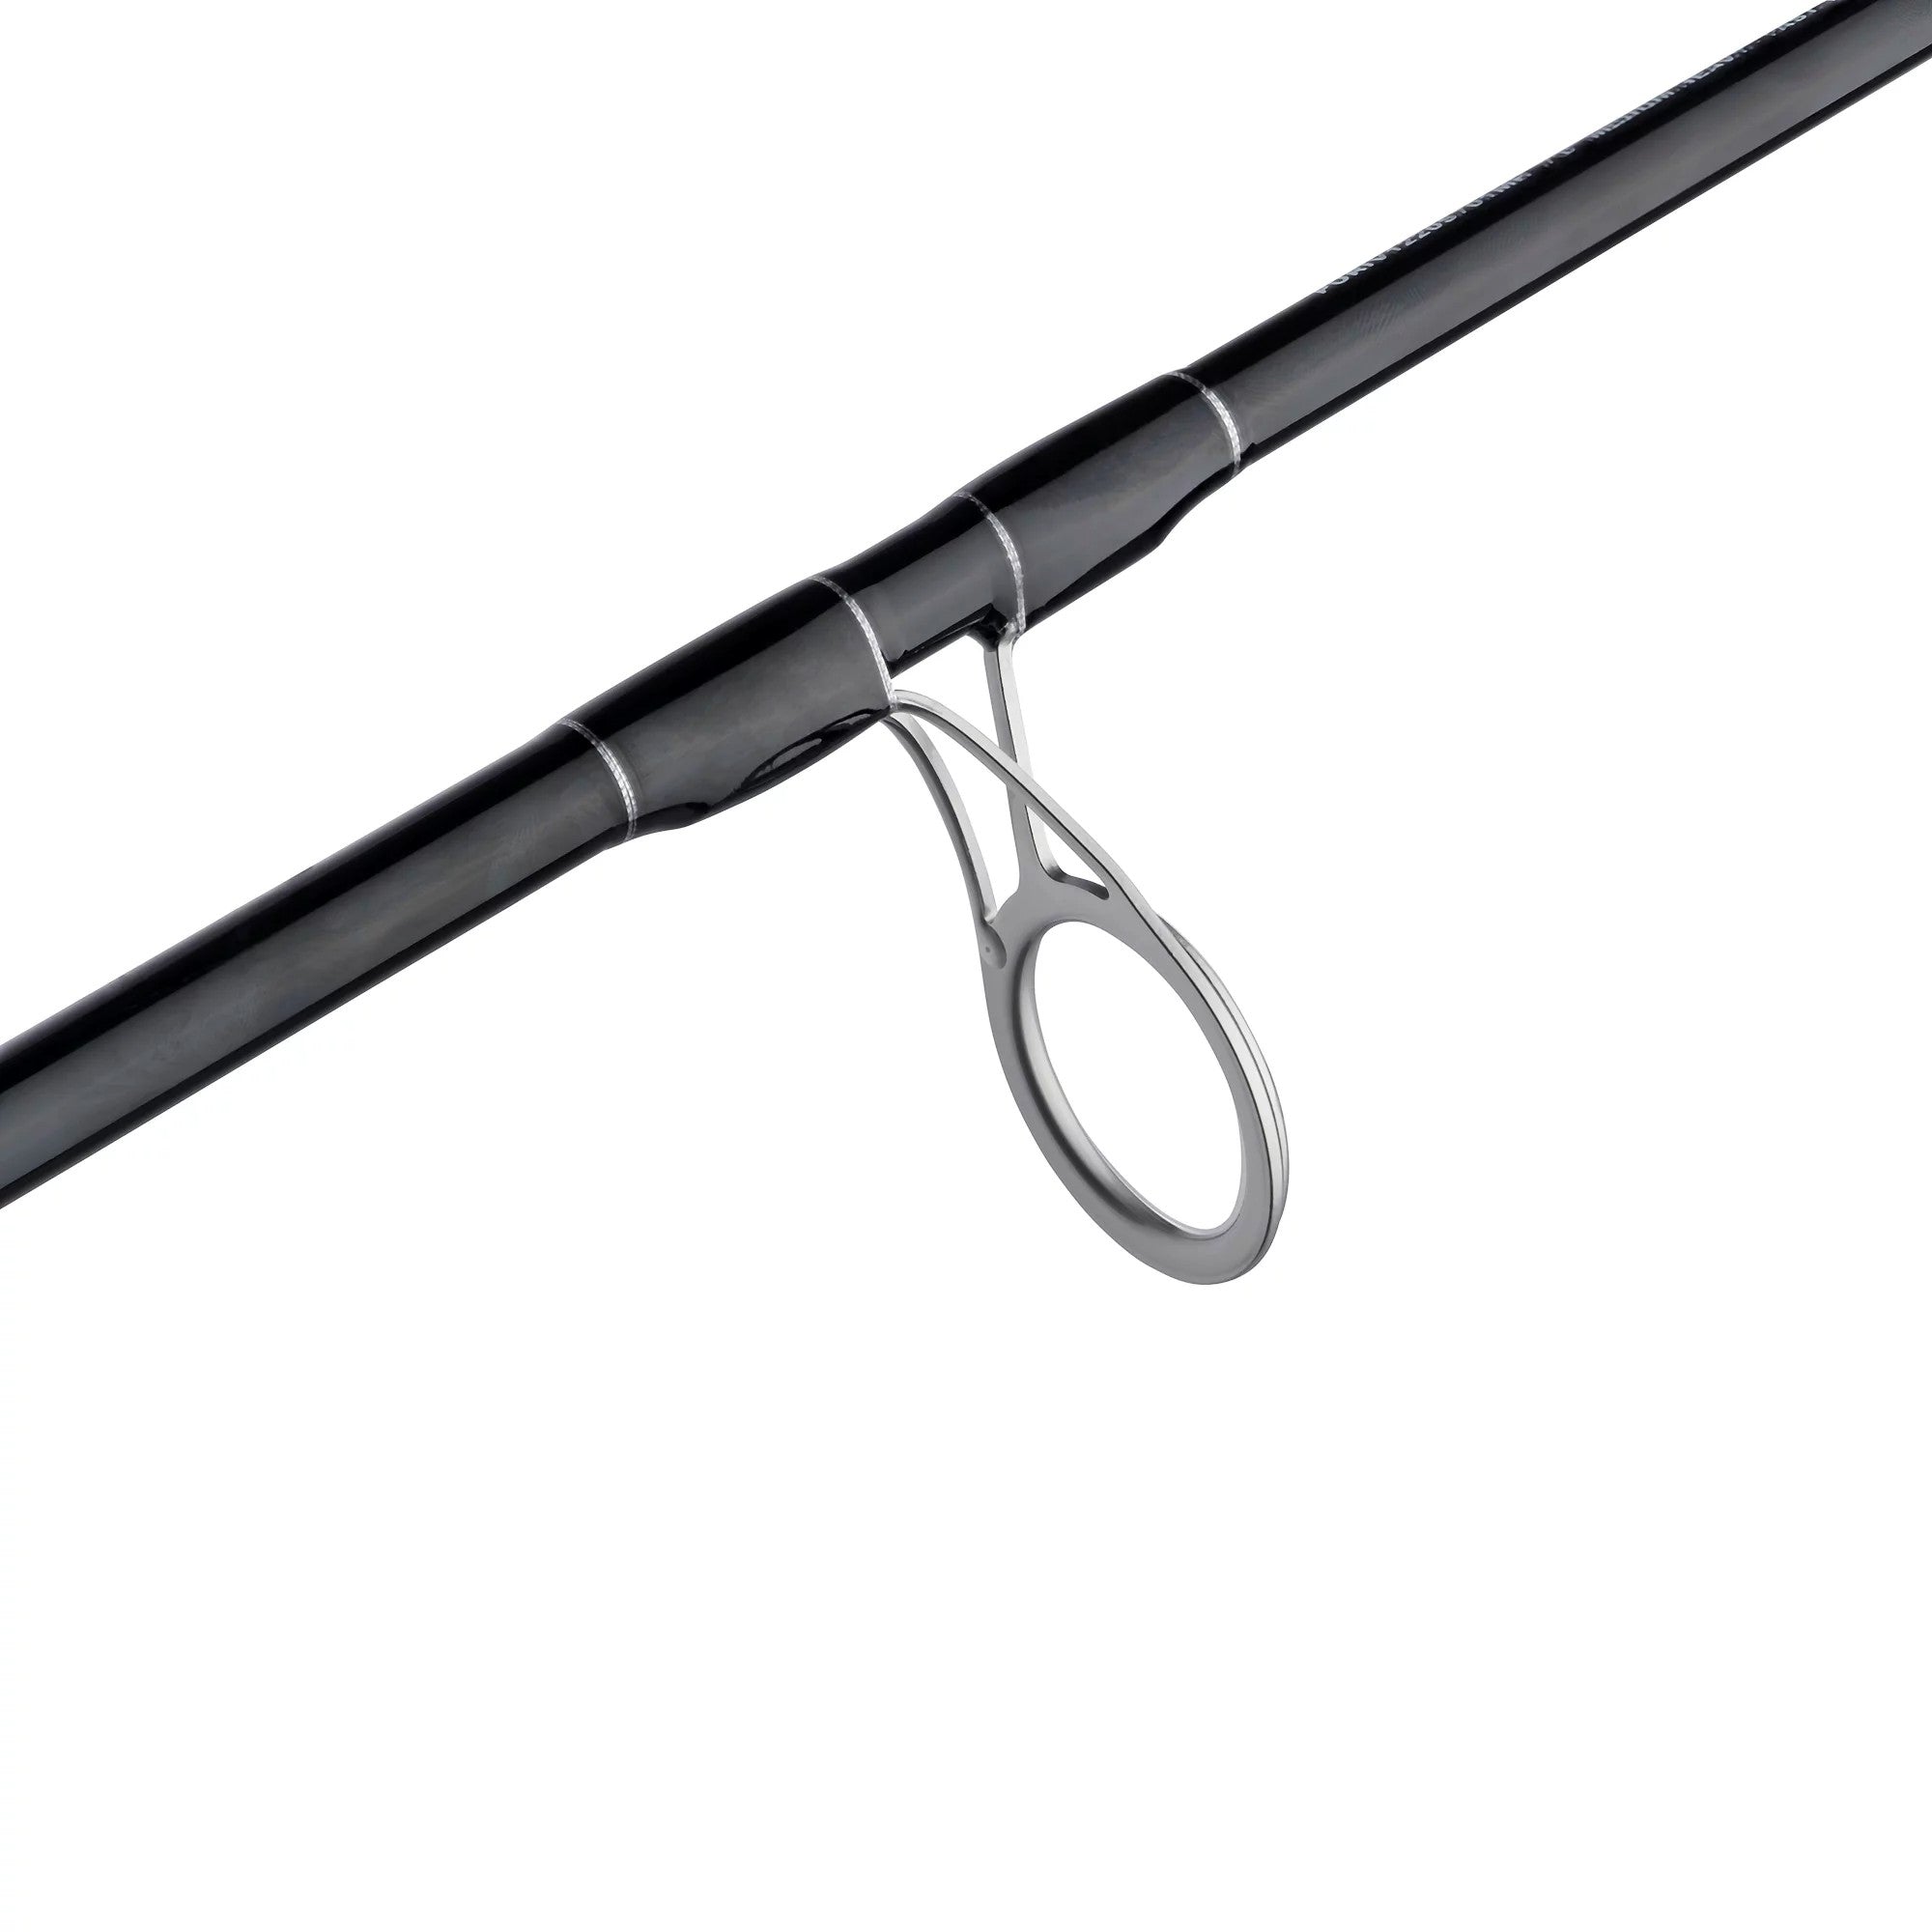 Image of the flexible tip of the PENN Pursuit IV fishing rod, demonstrating its thin diameter and taper.